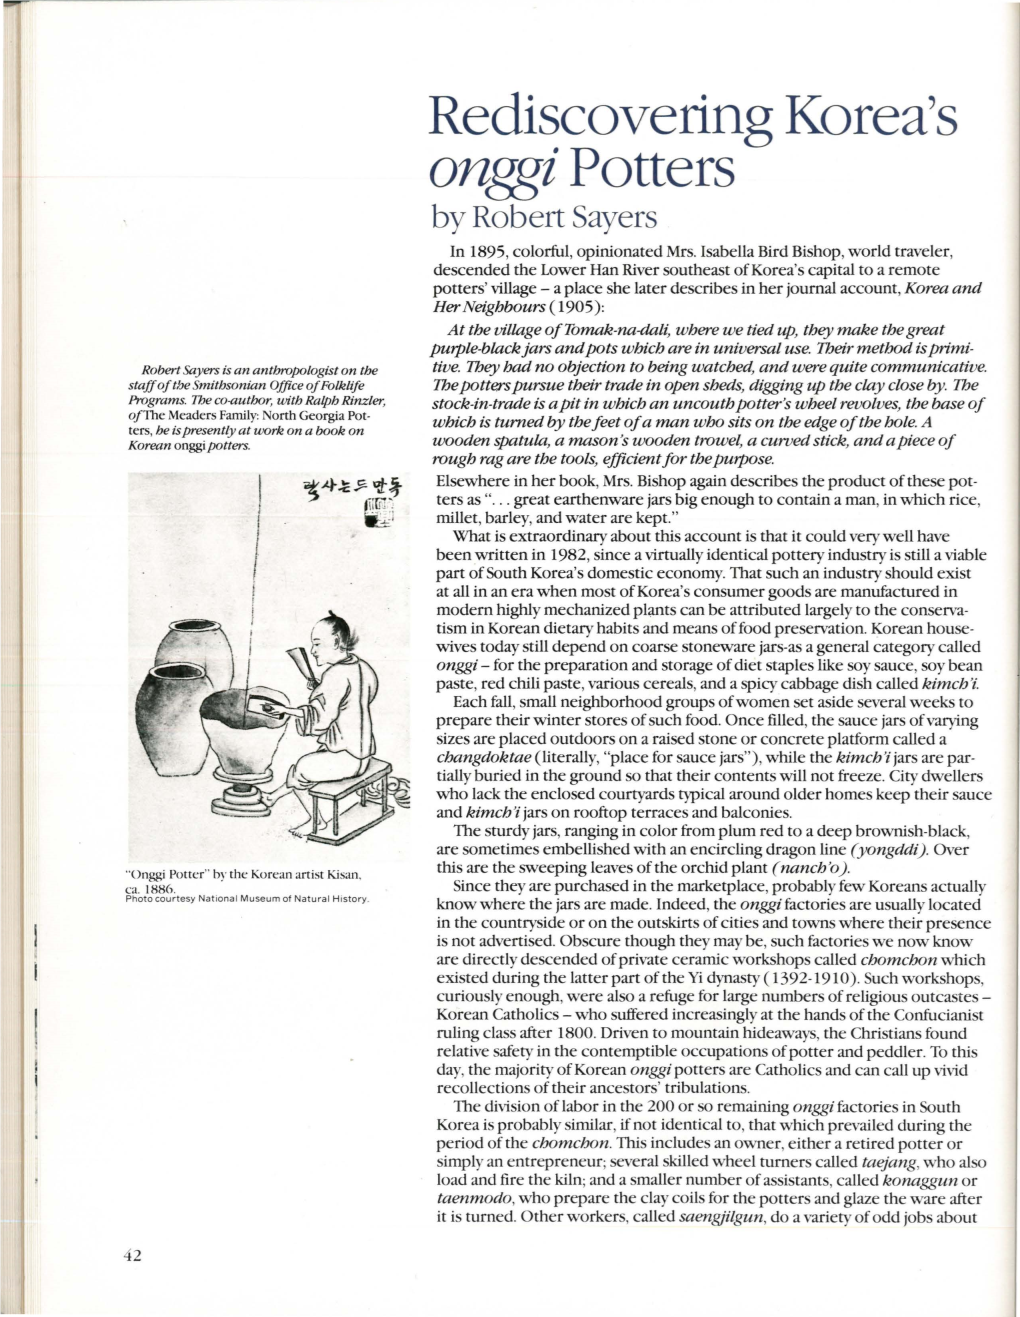 Rediscovering Korea's Onggi Potters by Robert Sayers in 1895, Colorful, Opinionated Mrs